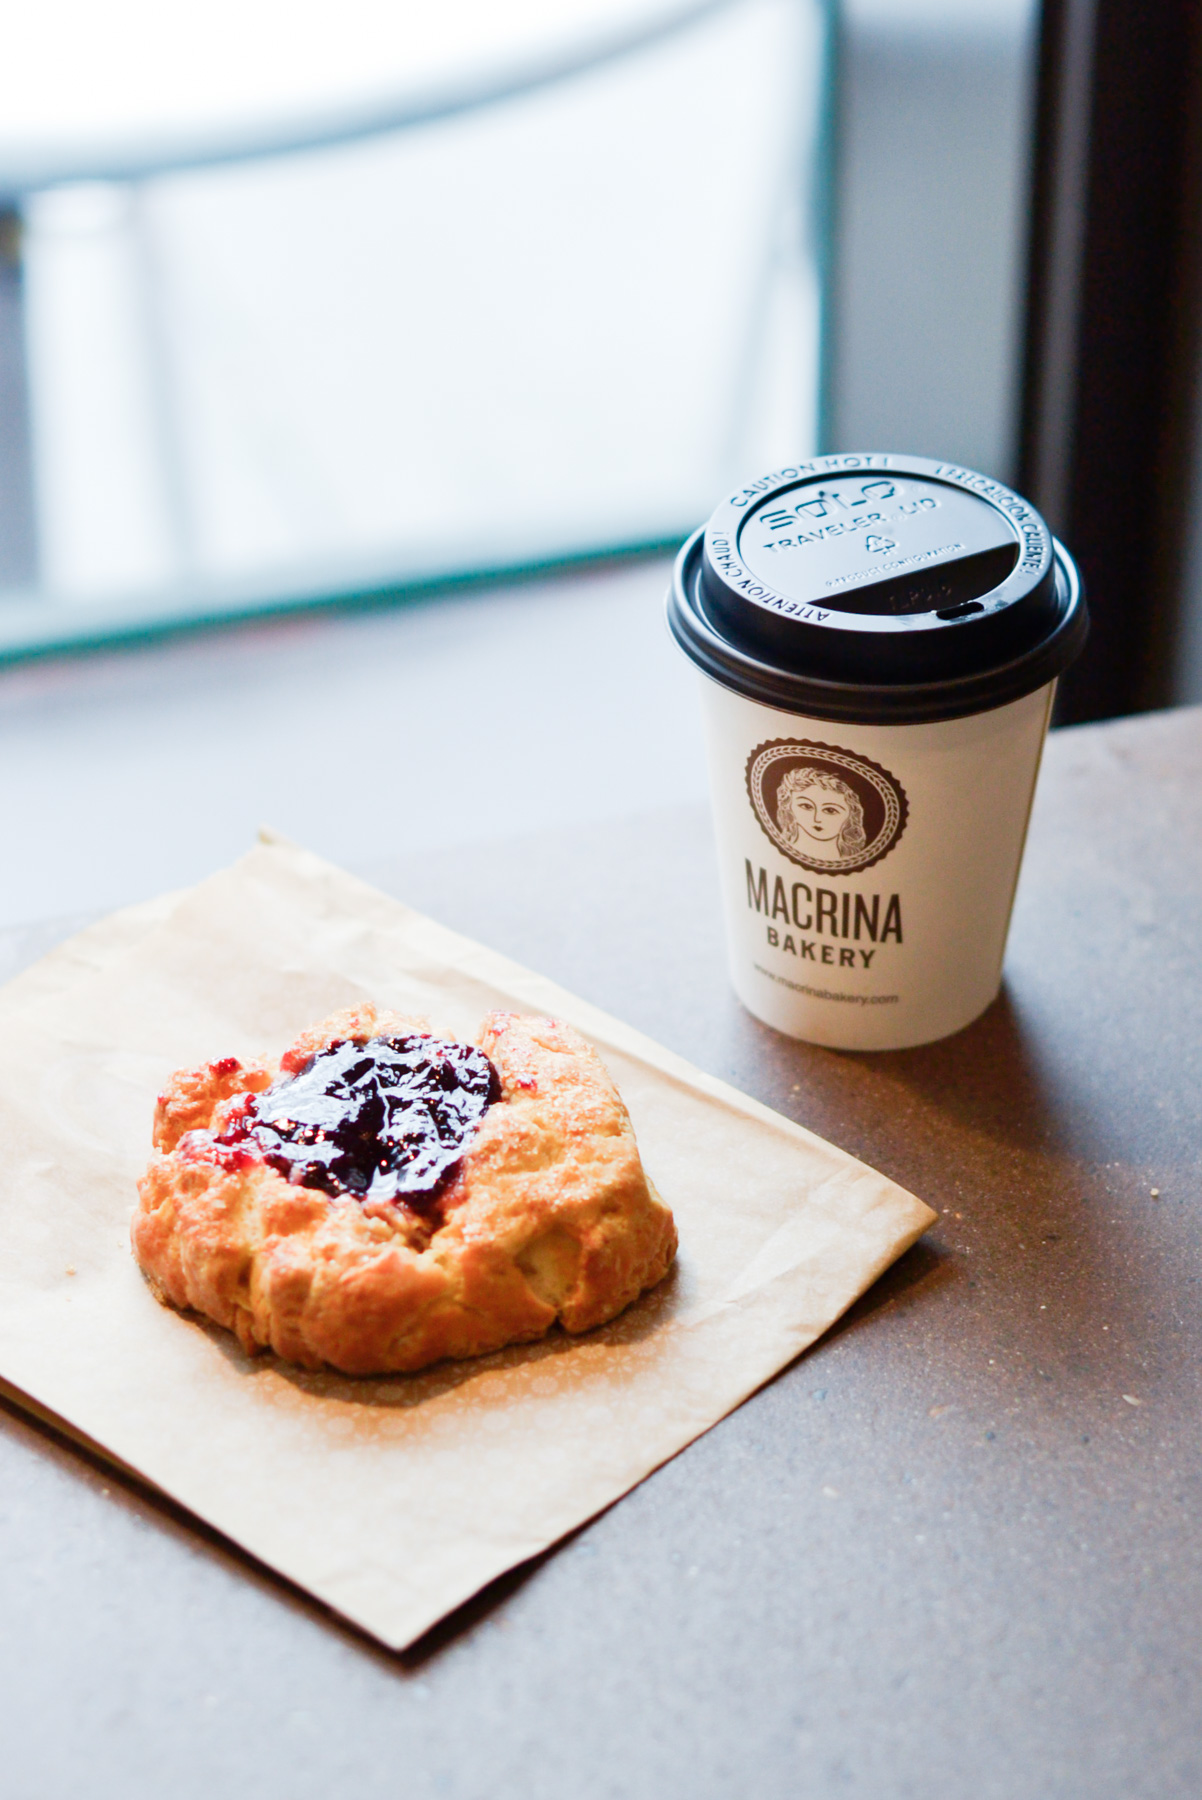 Macrina Bakery coffee and biscuit in Seattle